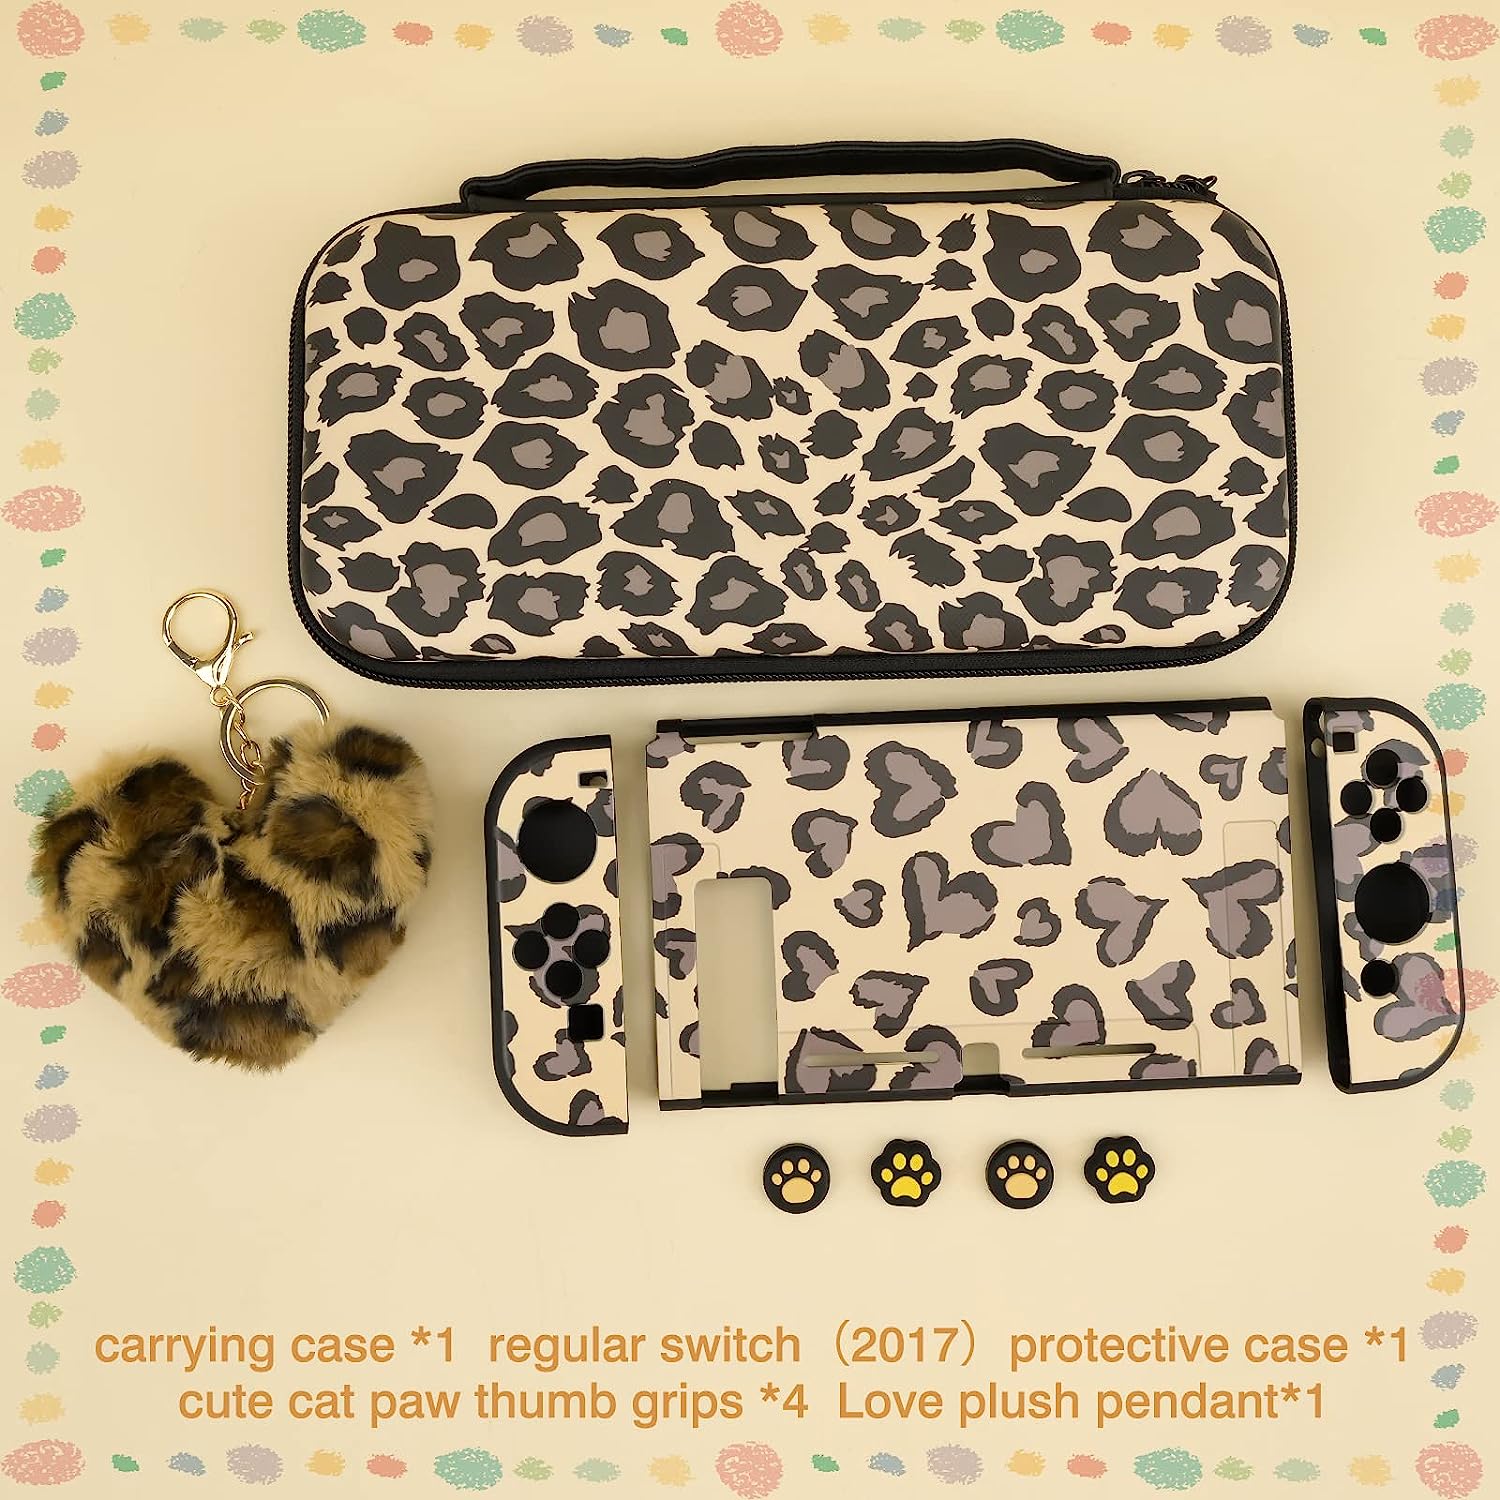 DLseego Brown Love Leopard Carrying Case kanggo Switch, Silicone Protective Case Soft Cover with 4PCS Thumb Grip Caps and Brown Plush Heart Pendant Hard Storage Case Accessories Kit Bundle for Girls